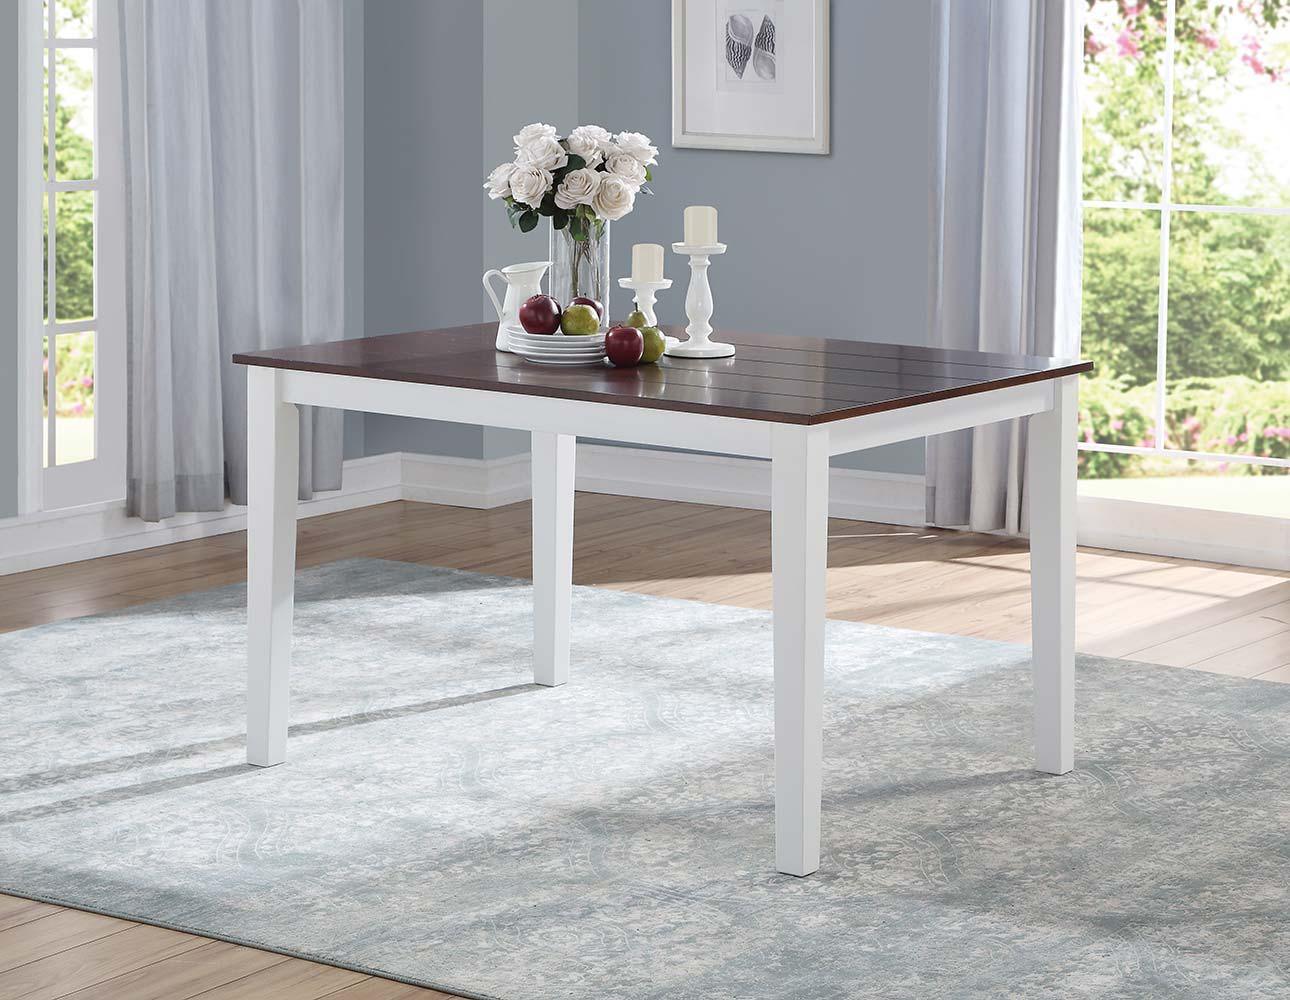 ACME - Green Leigh - Dining Table - White & Walnut - 5th Avenue Furniture